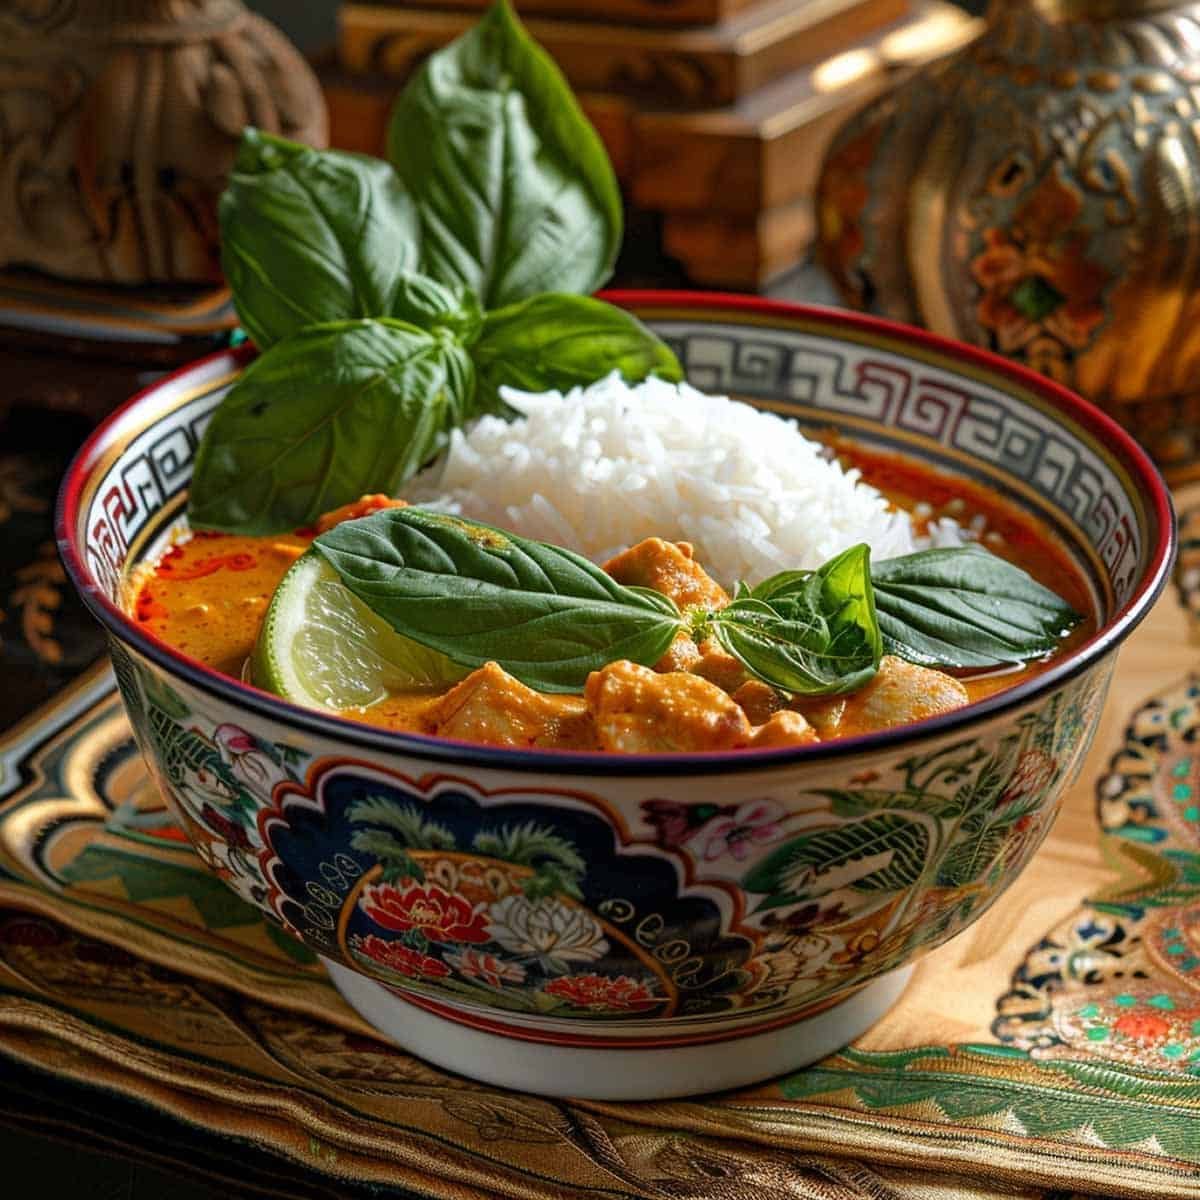 Bowl of Thai Red Curry (Gaeng Phed) garnished with fresh basil leaves and a clice of lime on the side